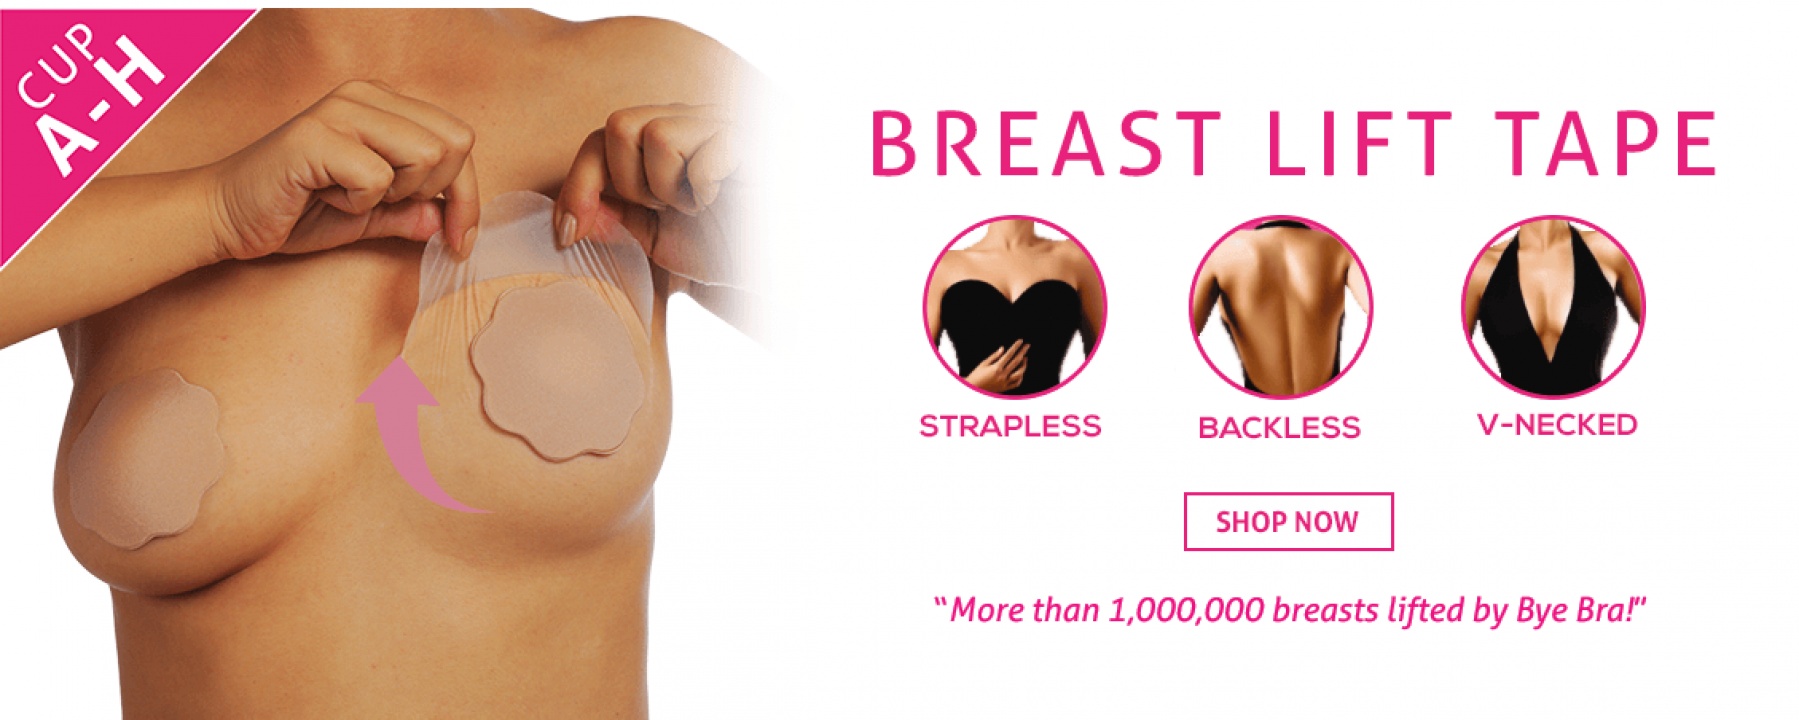 Adhesive breast lift—a relaxing experience for the women, bryst tape